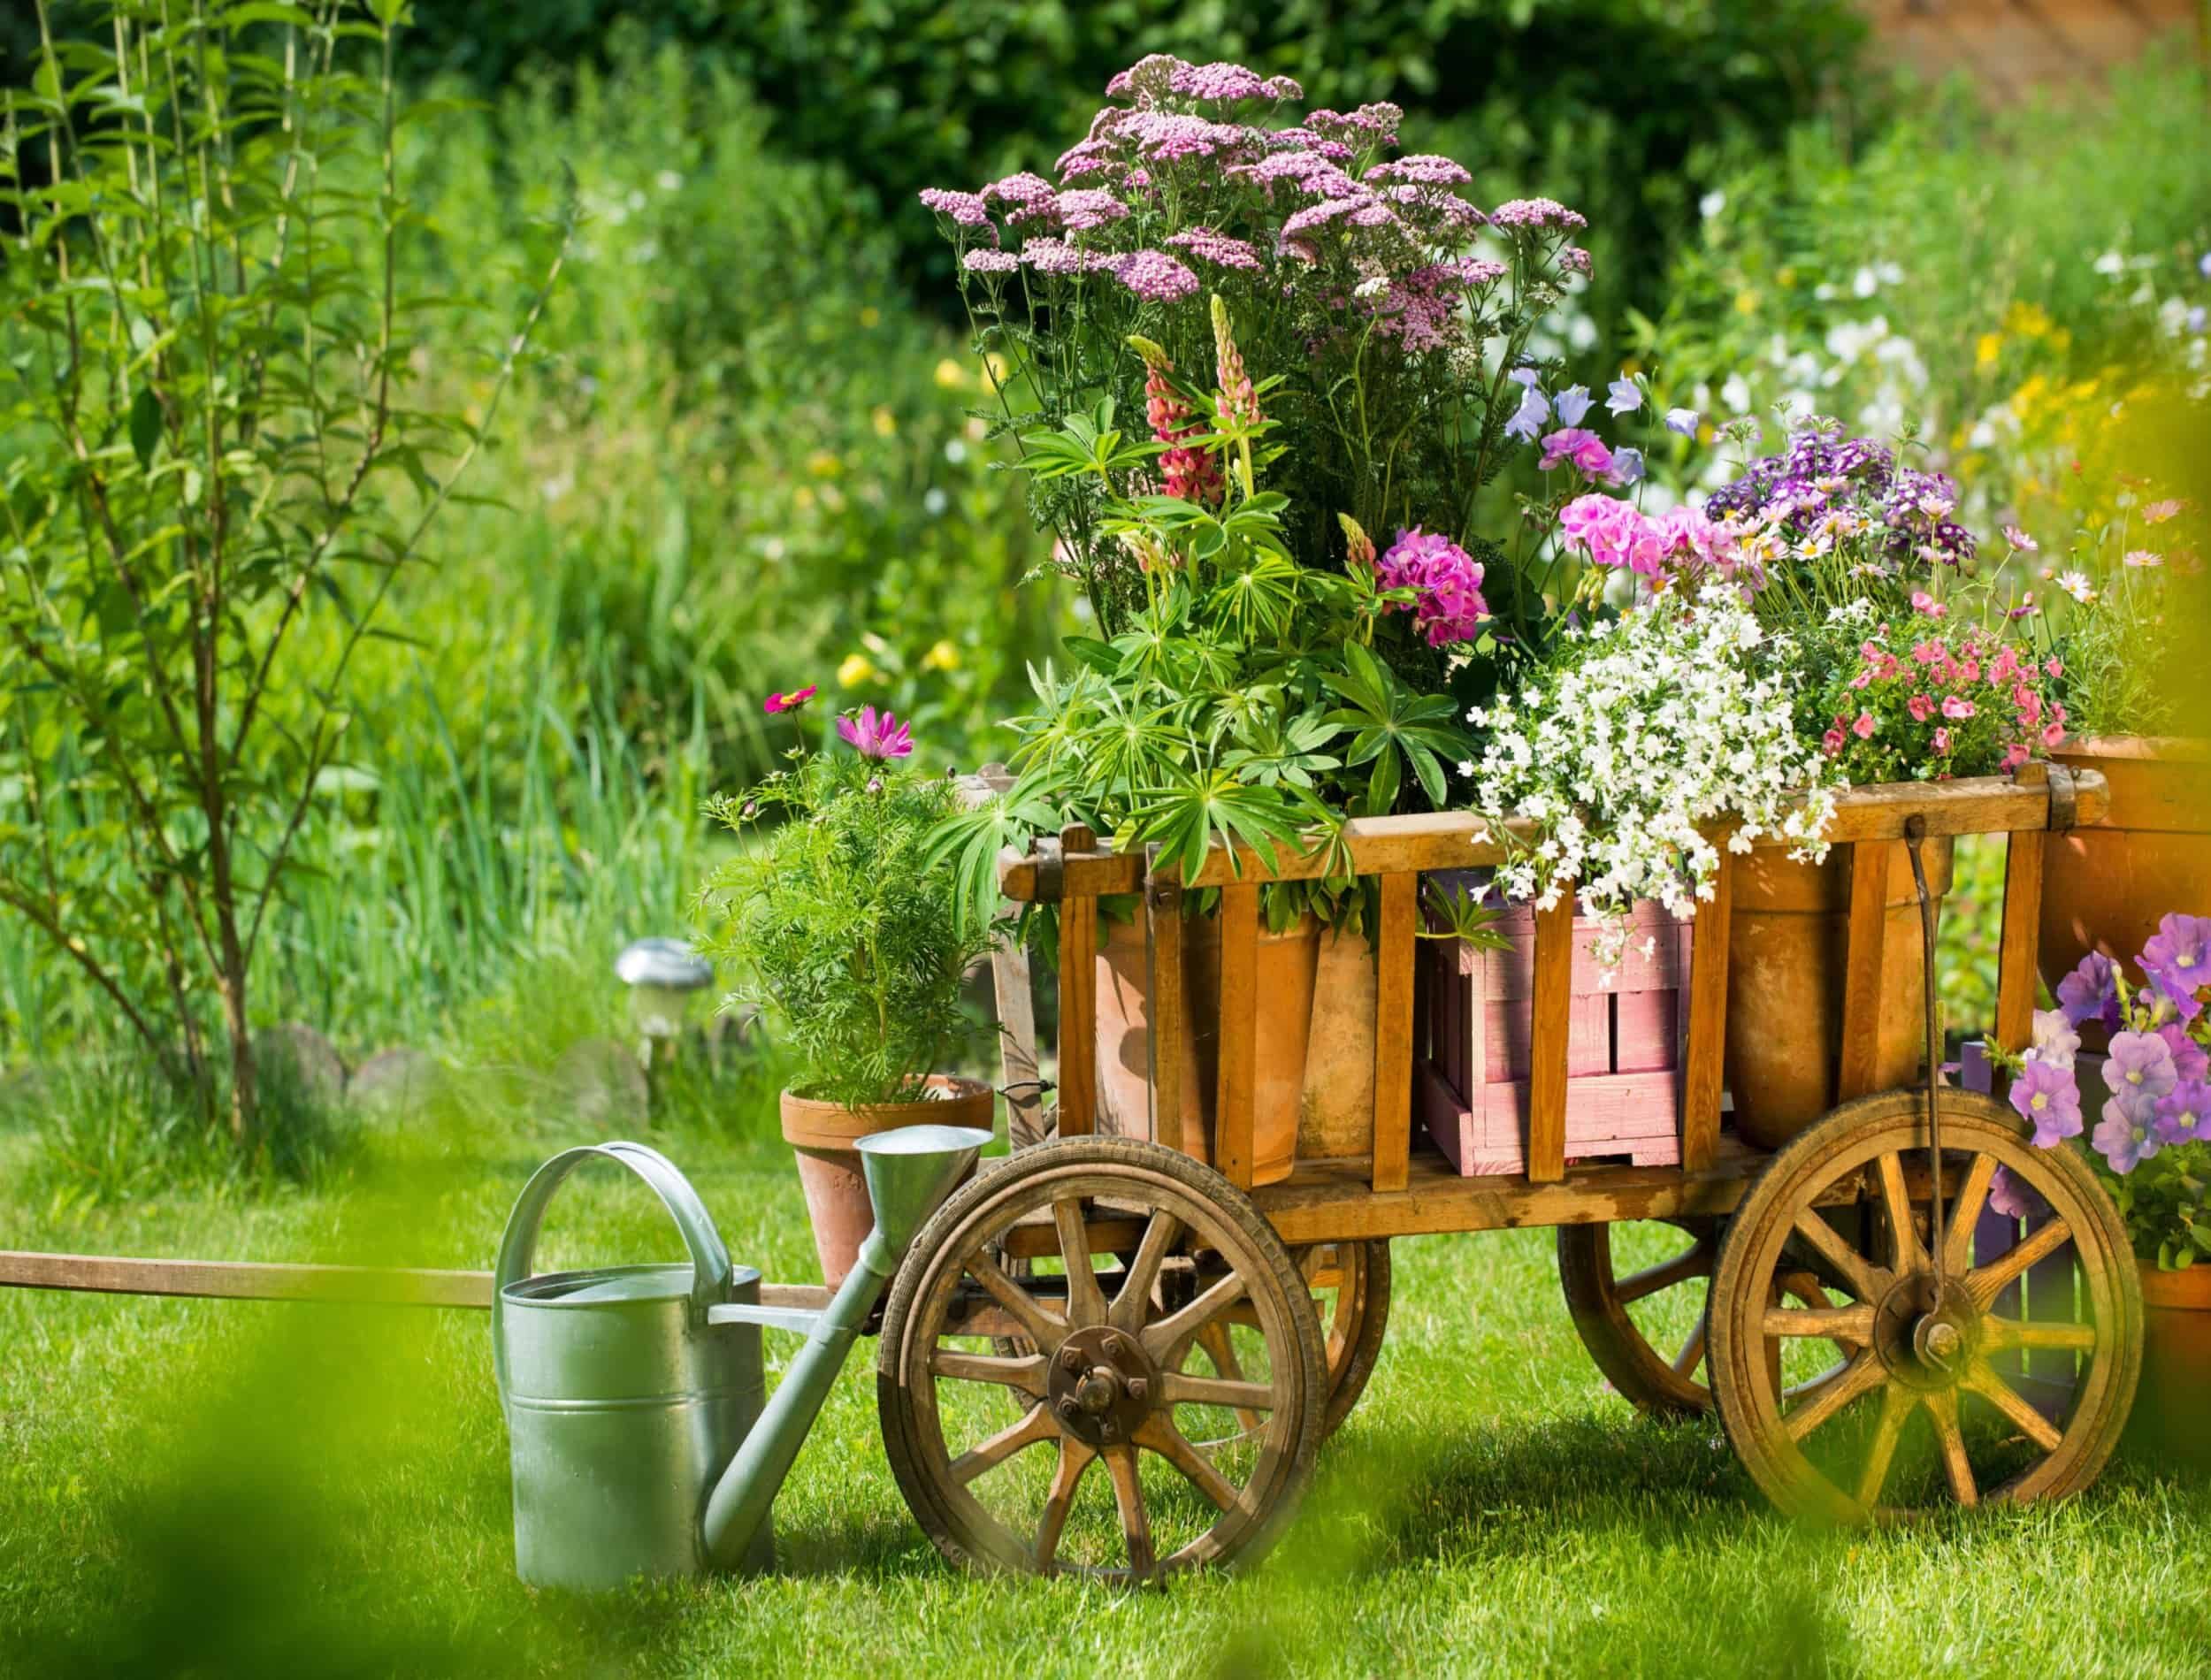 Idyllic garden with old wooden cart